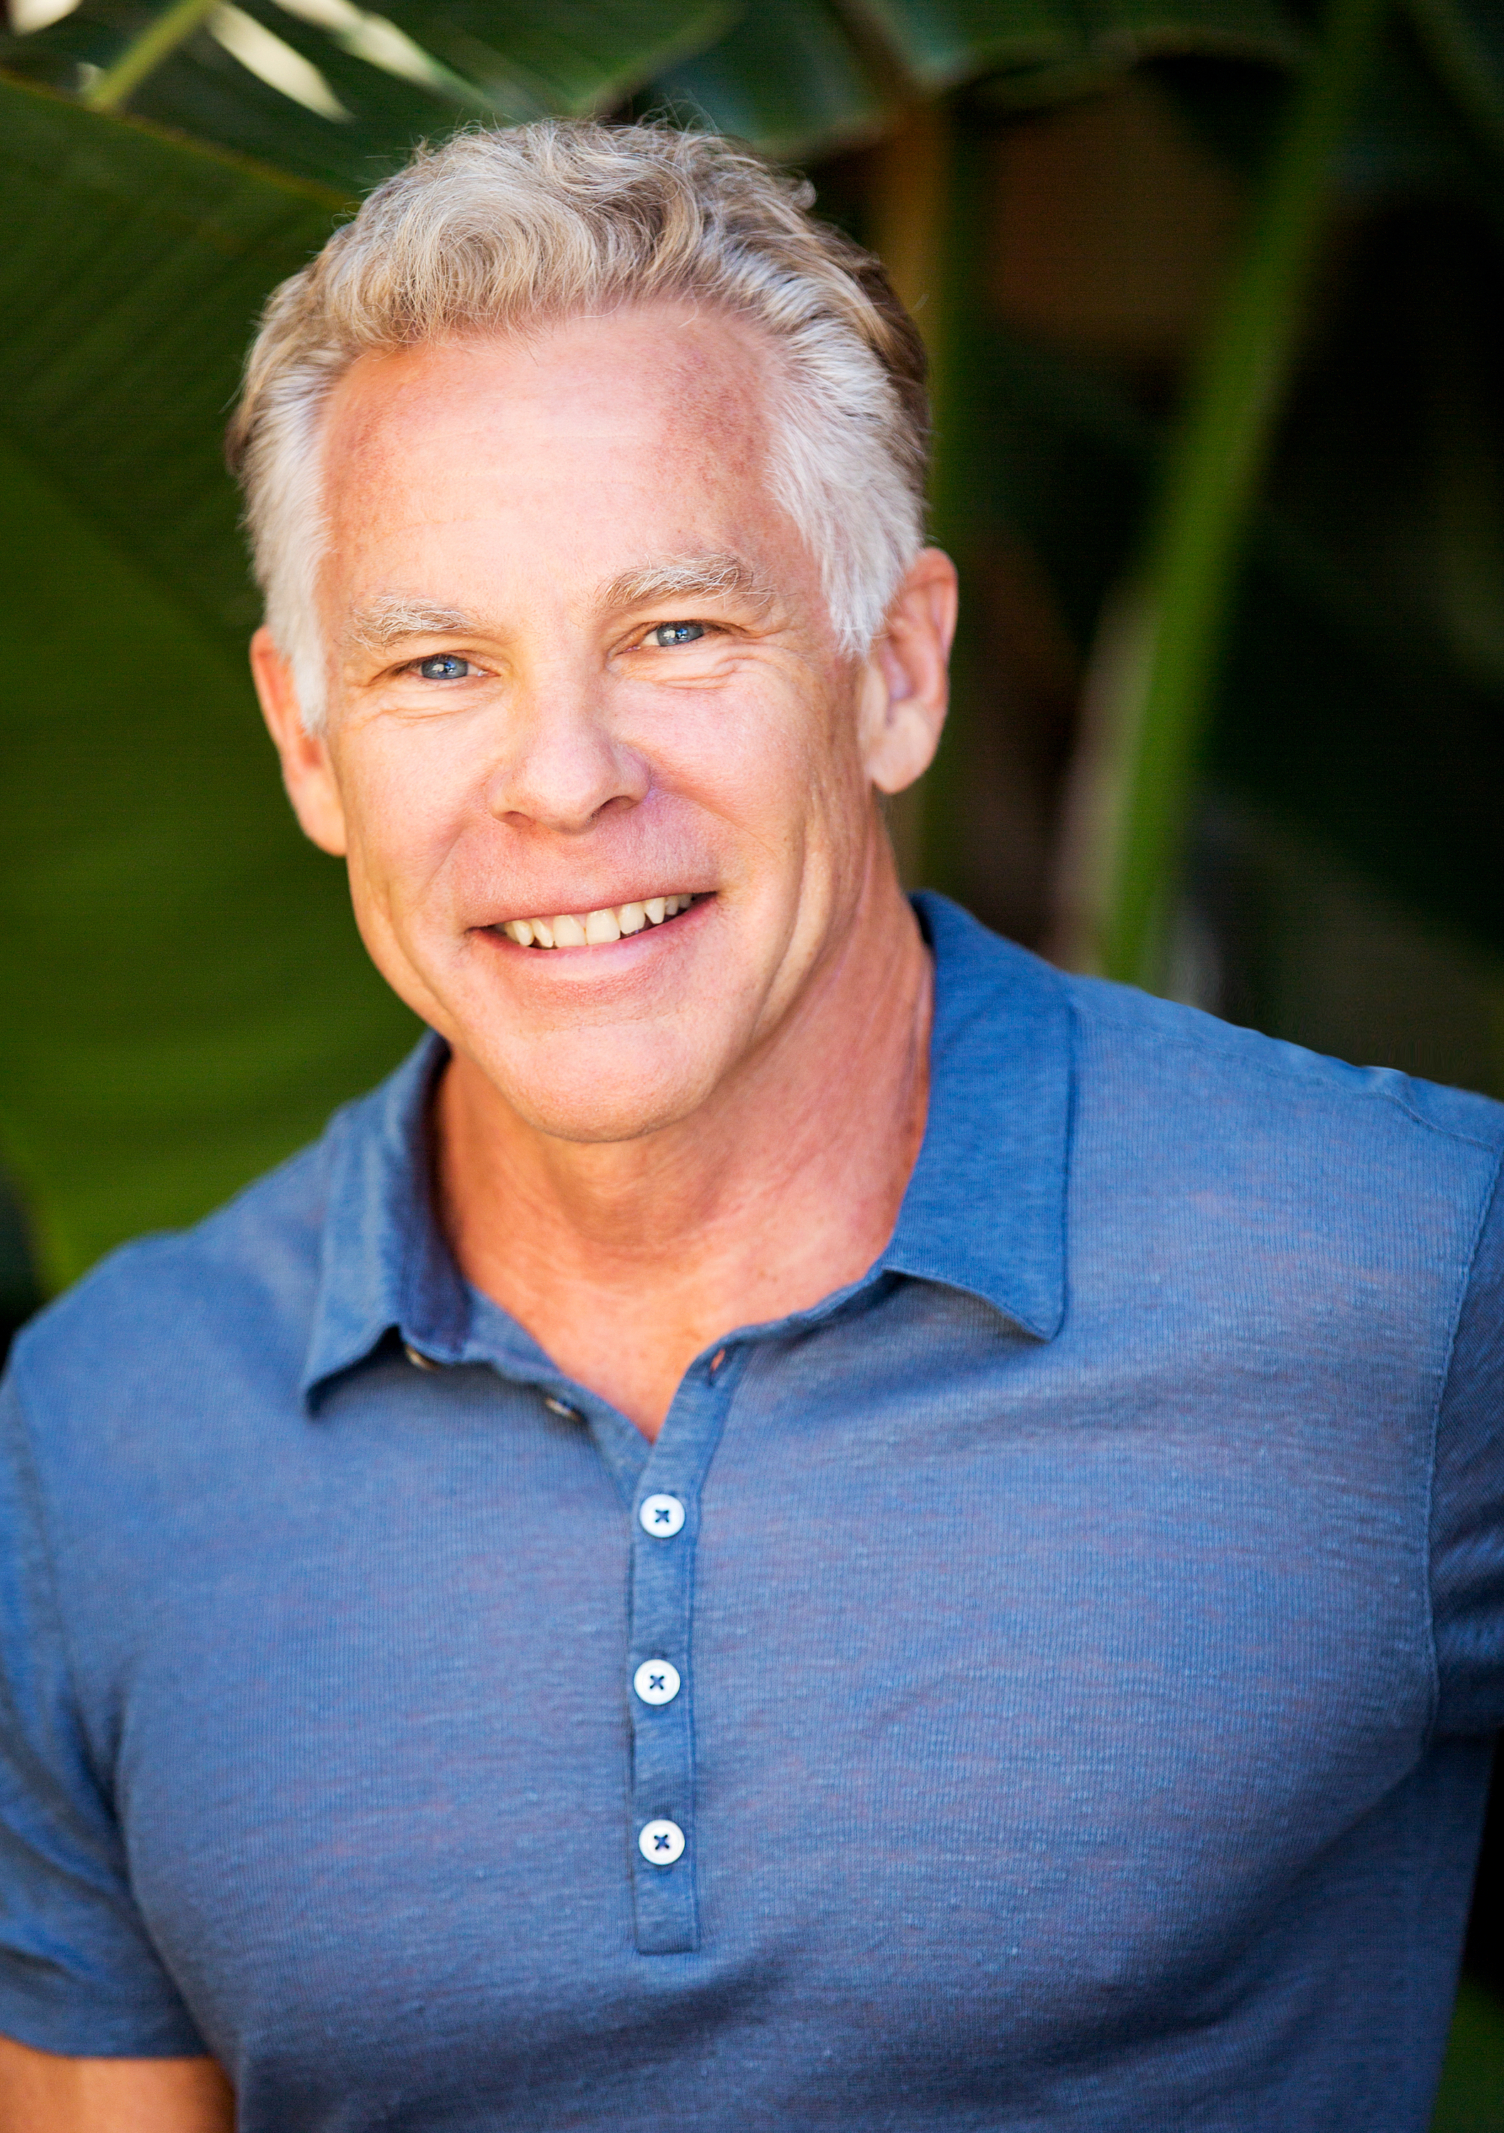 Mark Sisson: Get Primal on Your Cardio – #314